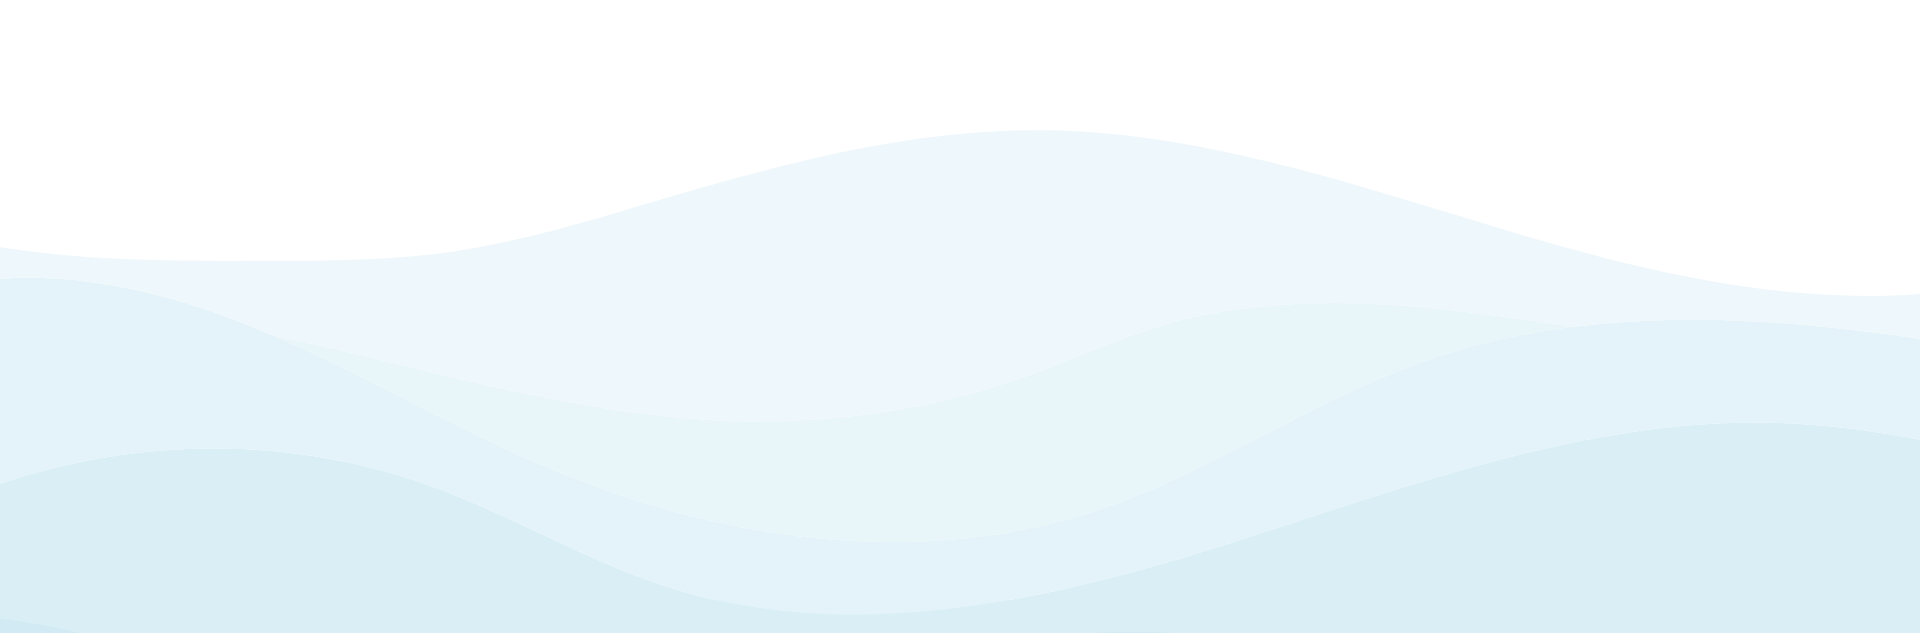 Light blue background image with 4 waves on top of each other